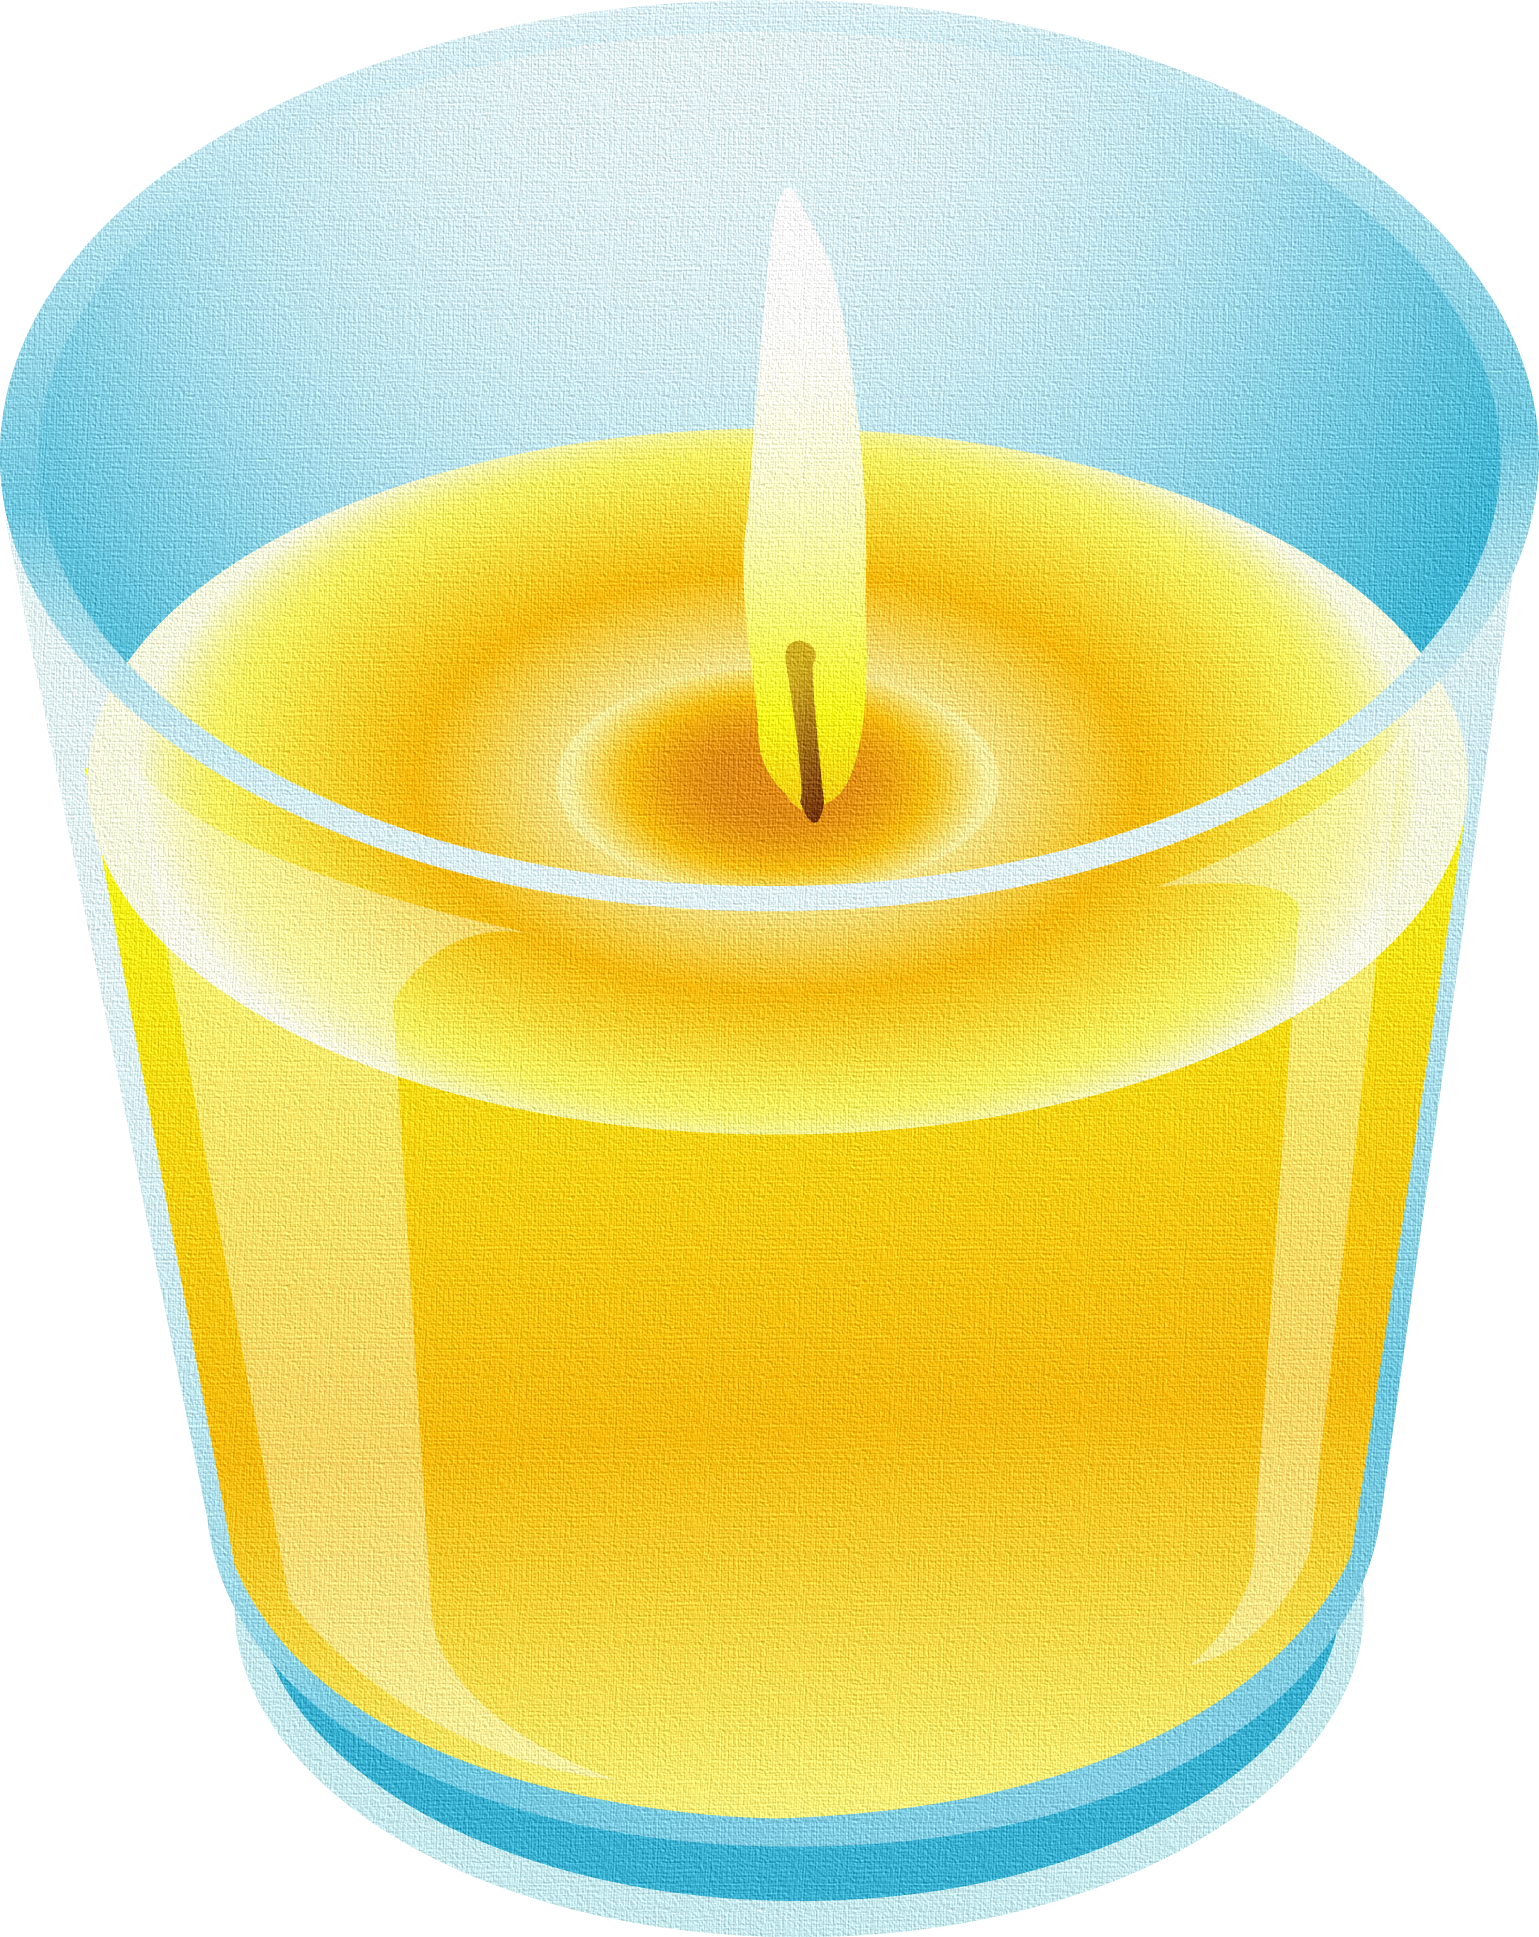 Candles Flameless Votive Lighting Candle Yankee PNG Image